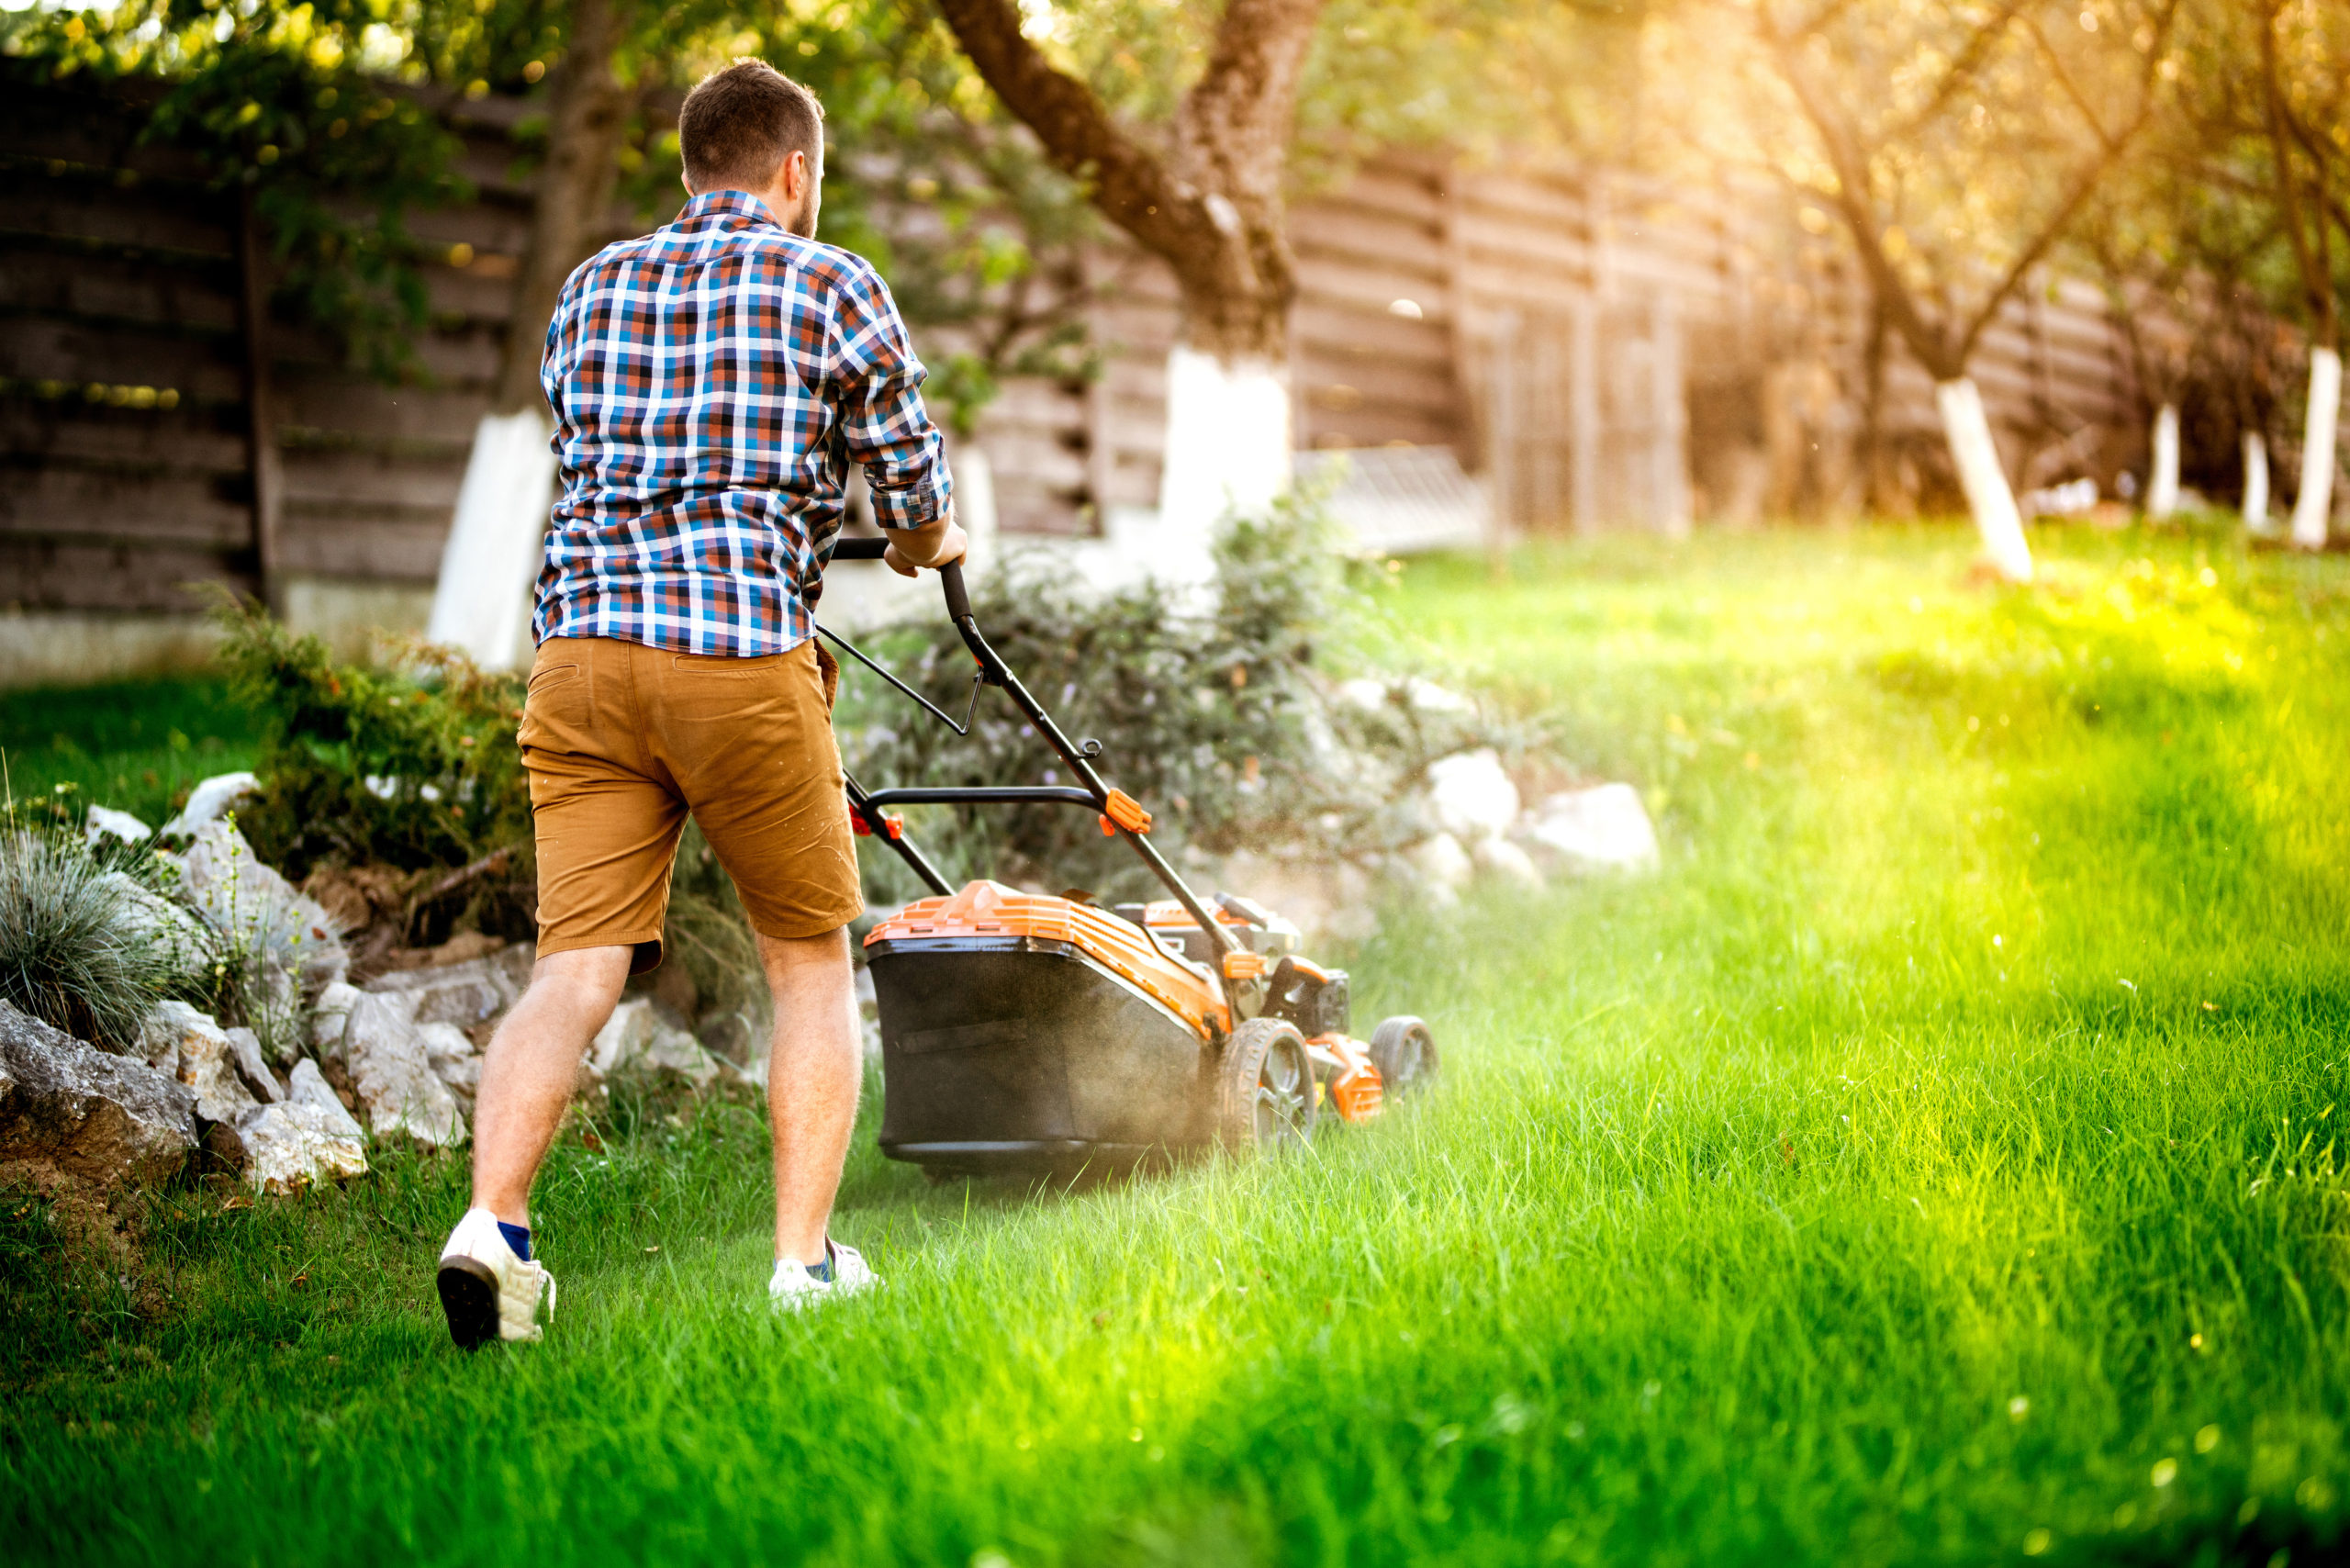 A white man mows a lush green yard with a push mower. His back is to us. he wears khaki shorts, a blue and white plaid shirt and white sneakers. The sun shines brightly.